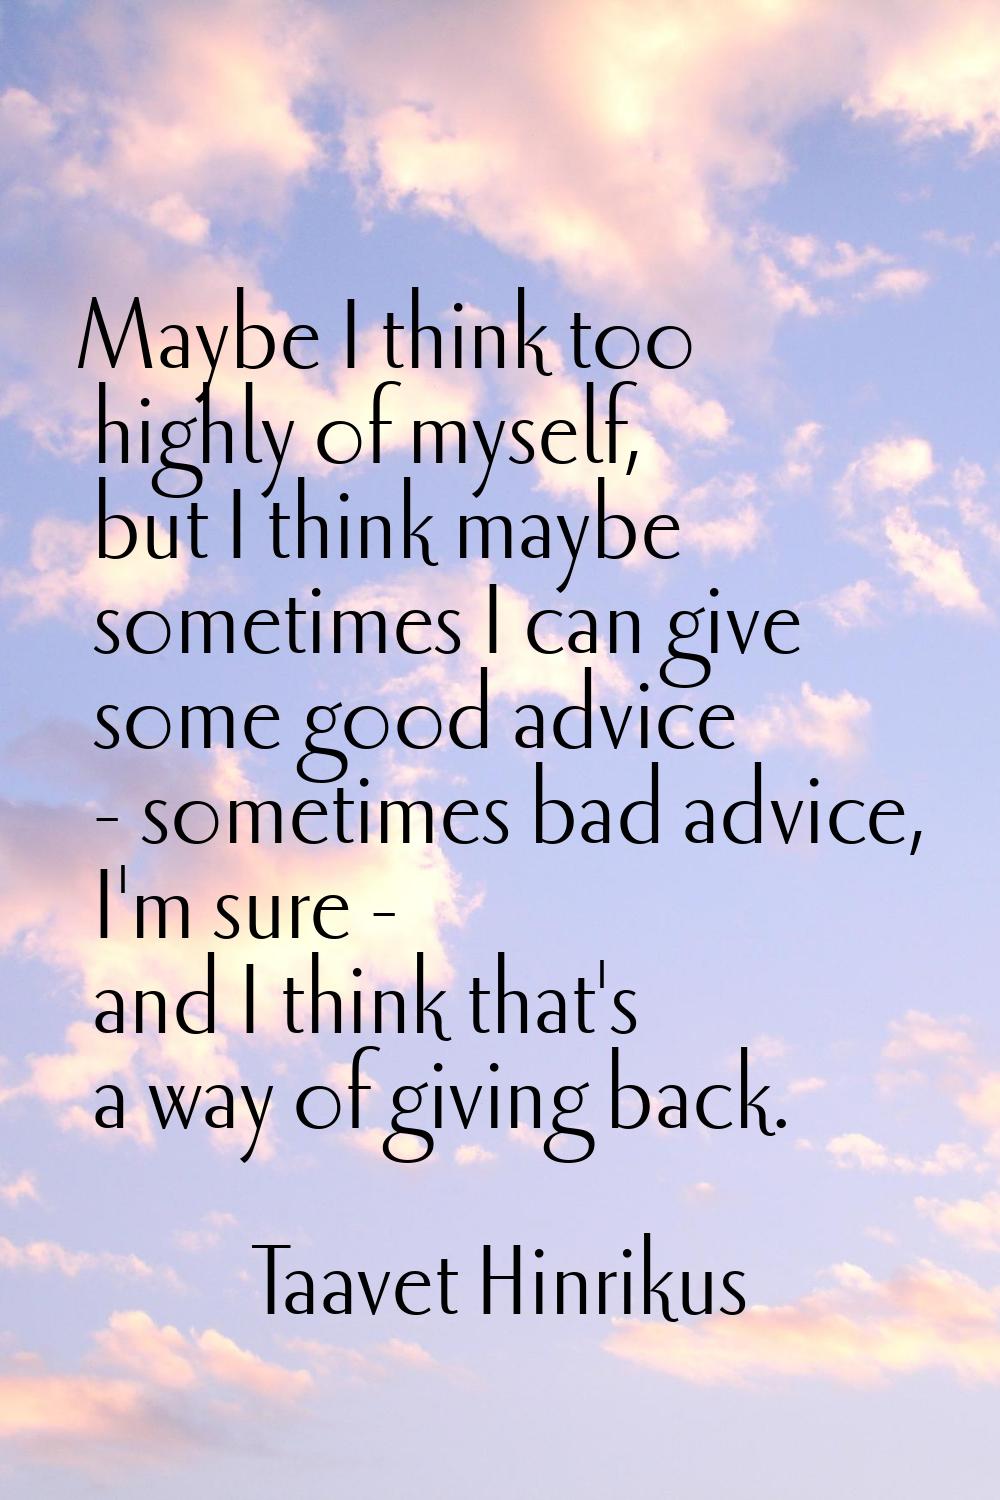 Maybe I think too highly of myself, but I think maybe sometimes I can give some good advice - somet